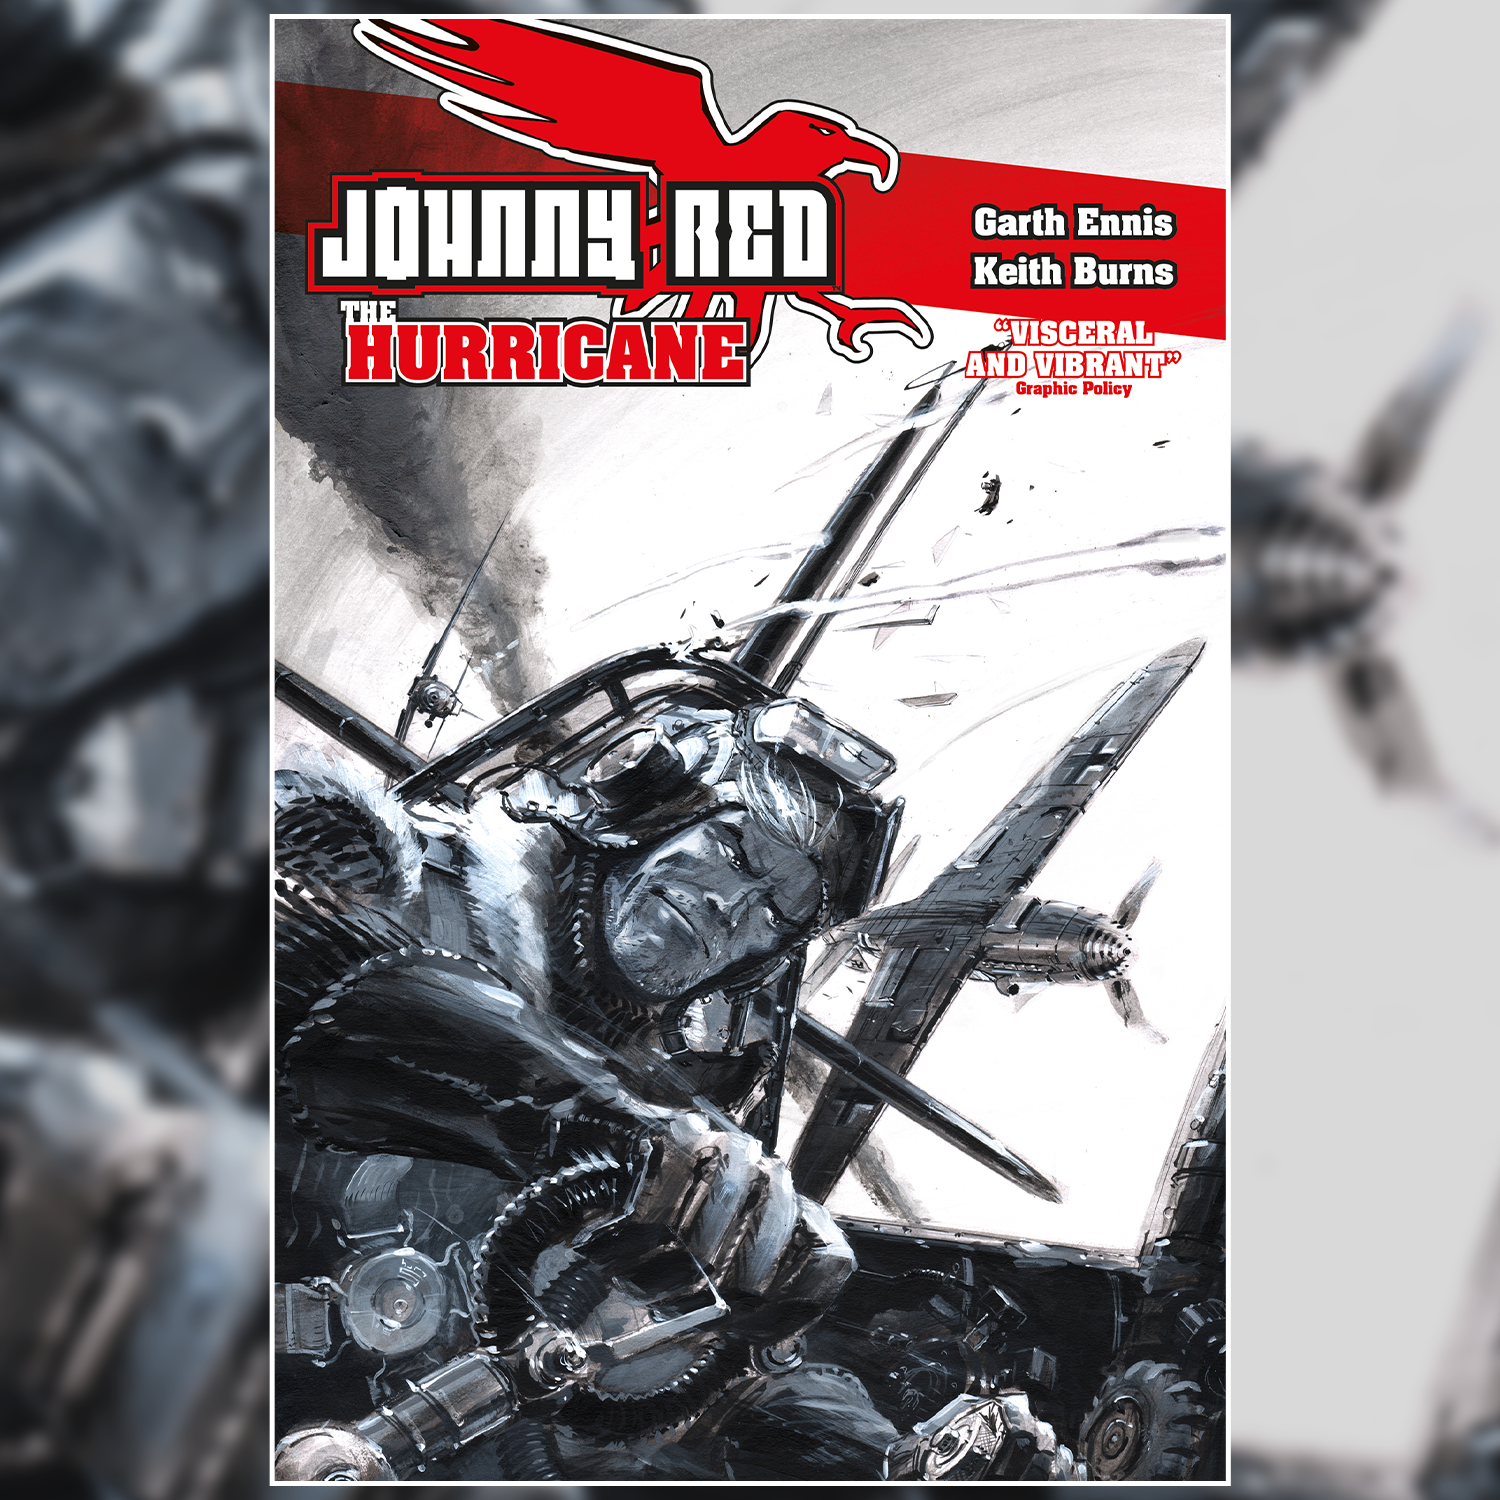 Available for pre-order now – Johnny Red: The Hurricane